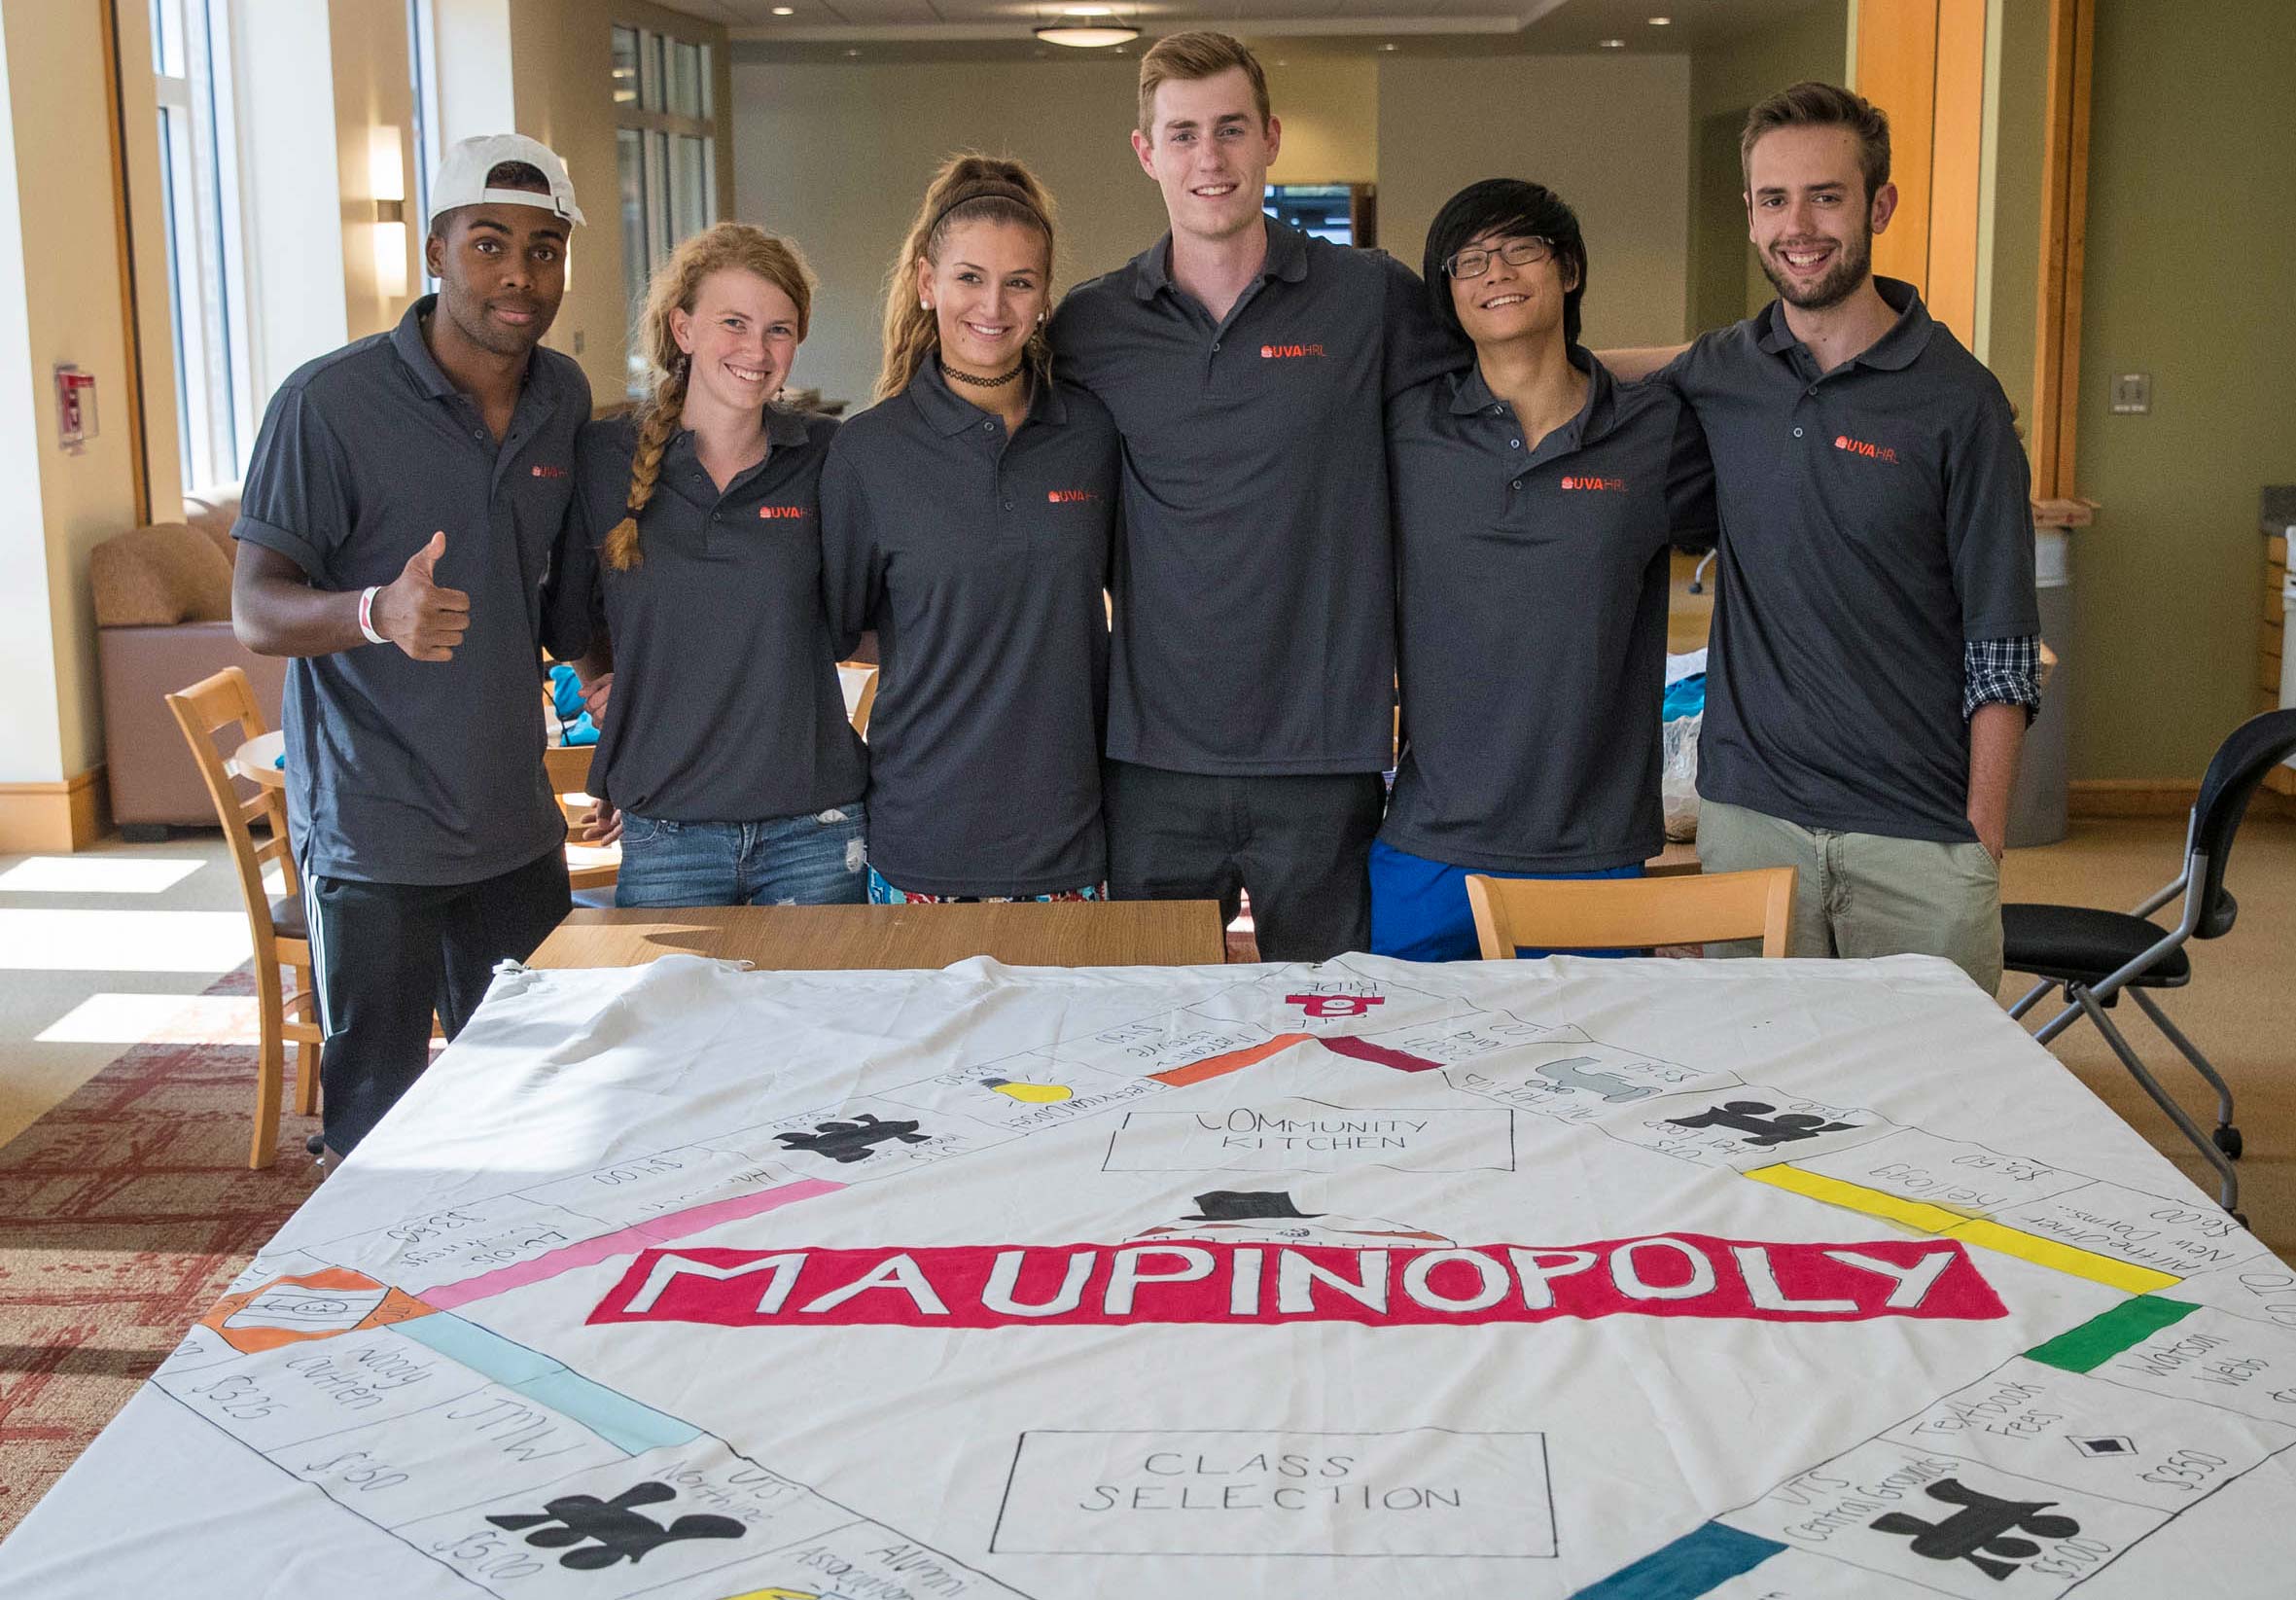 Students stand in front of a huge Maupinopoly board